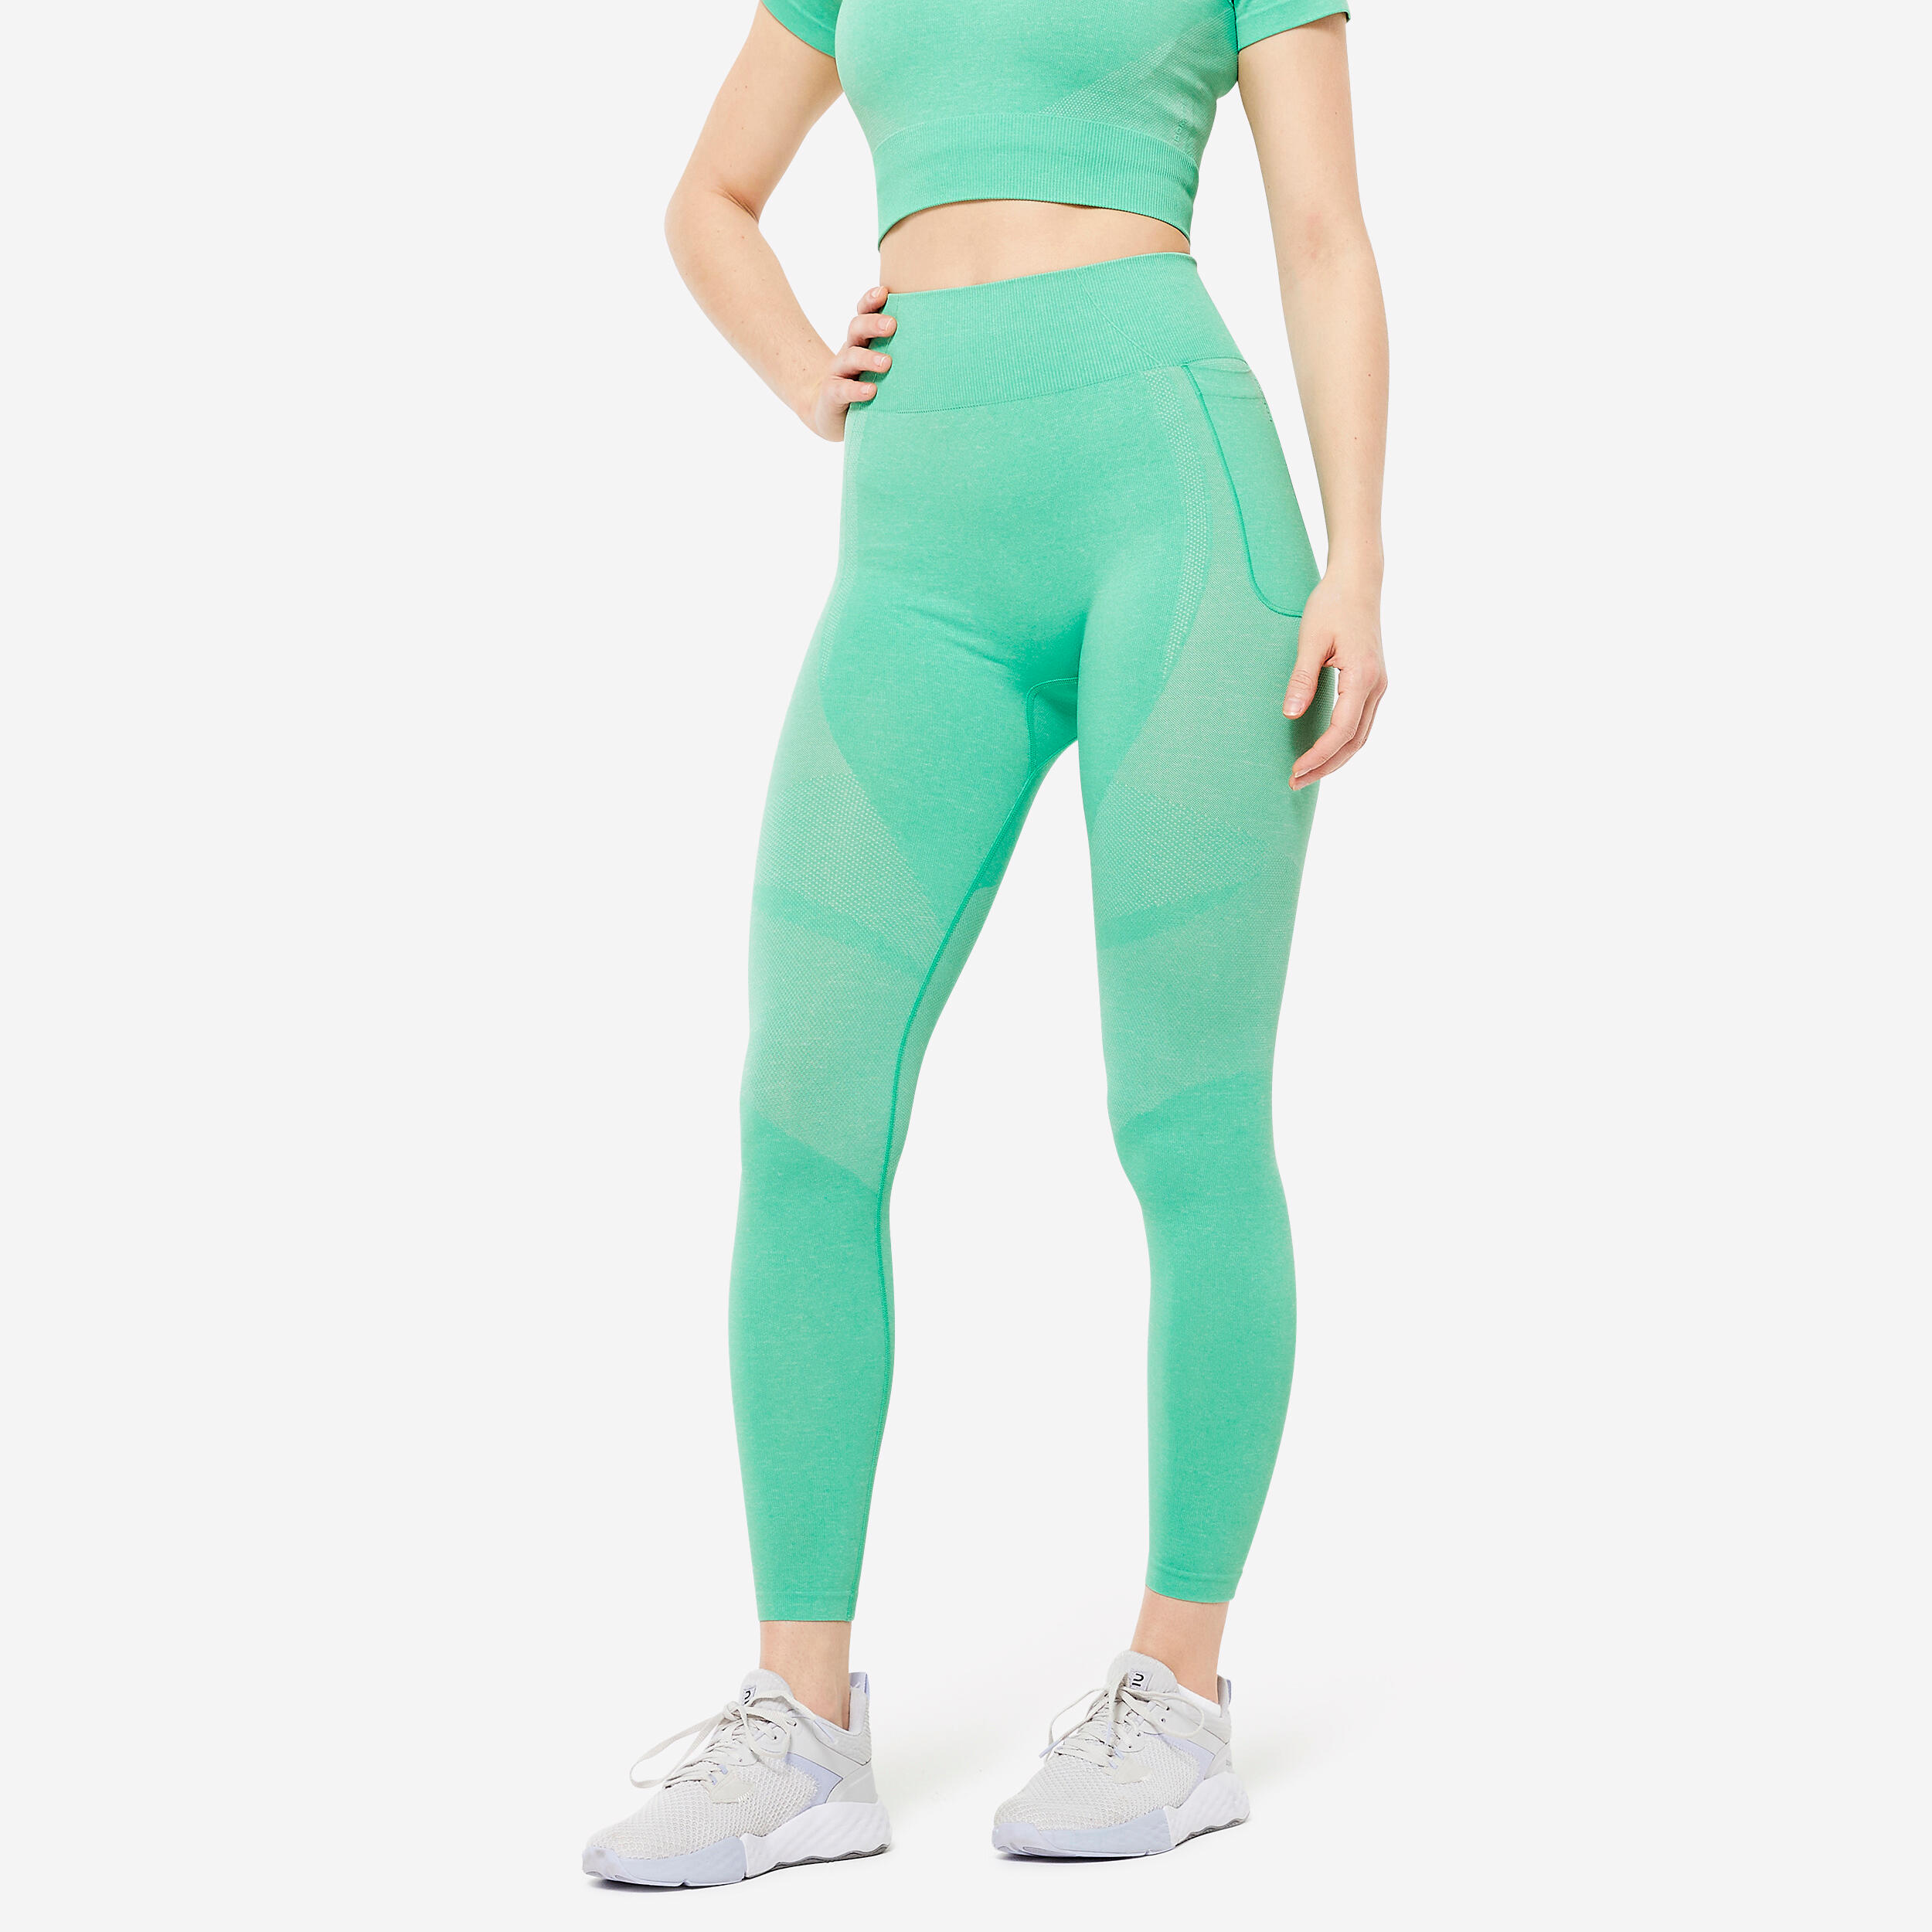 Long Leggings with High Waist - Mint Green - Comfortable and Stylish